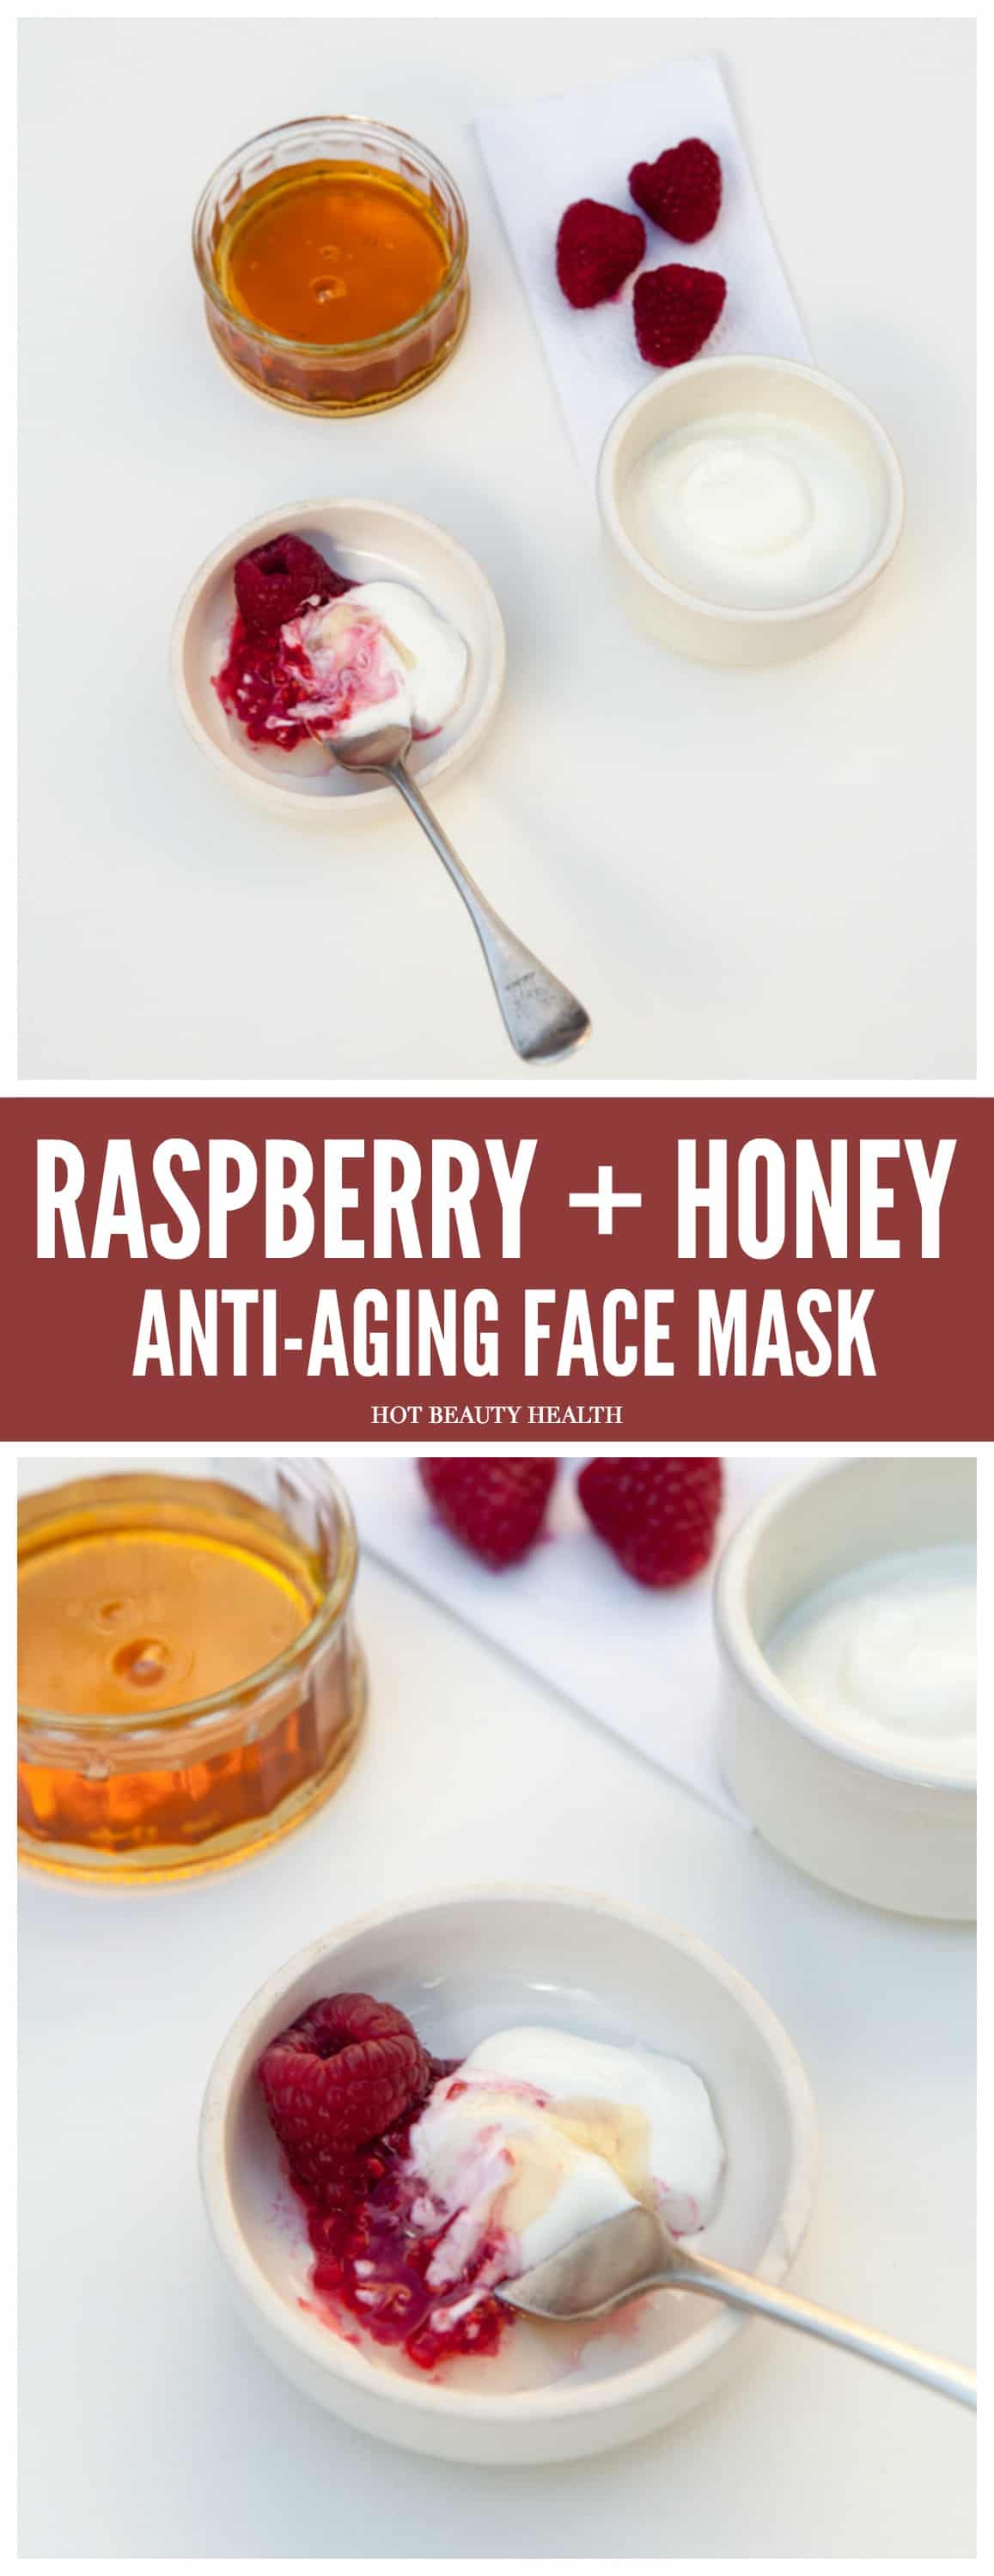 DIY Beauty: This anti-aging raspberry honey face mask can help reduce wrinkles,   treat discoloration and hyperpigmentation,   and tighten loose skin.